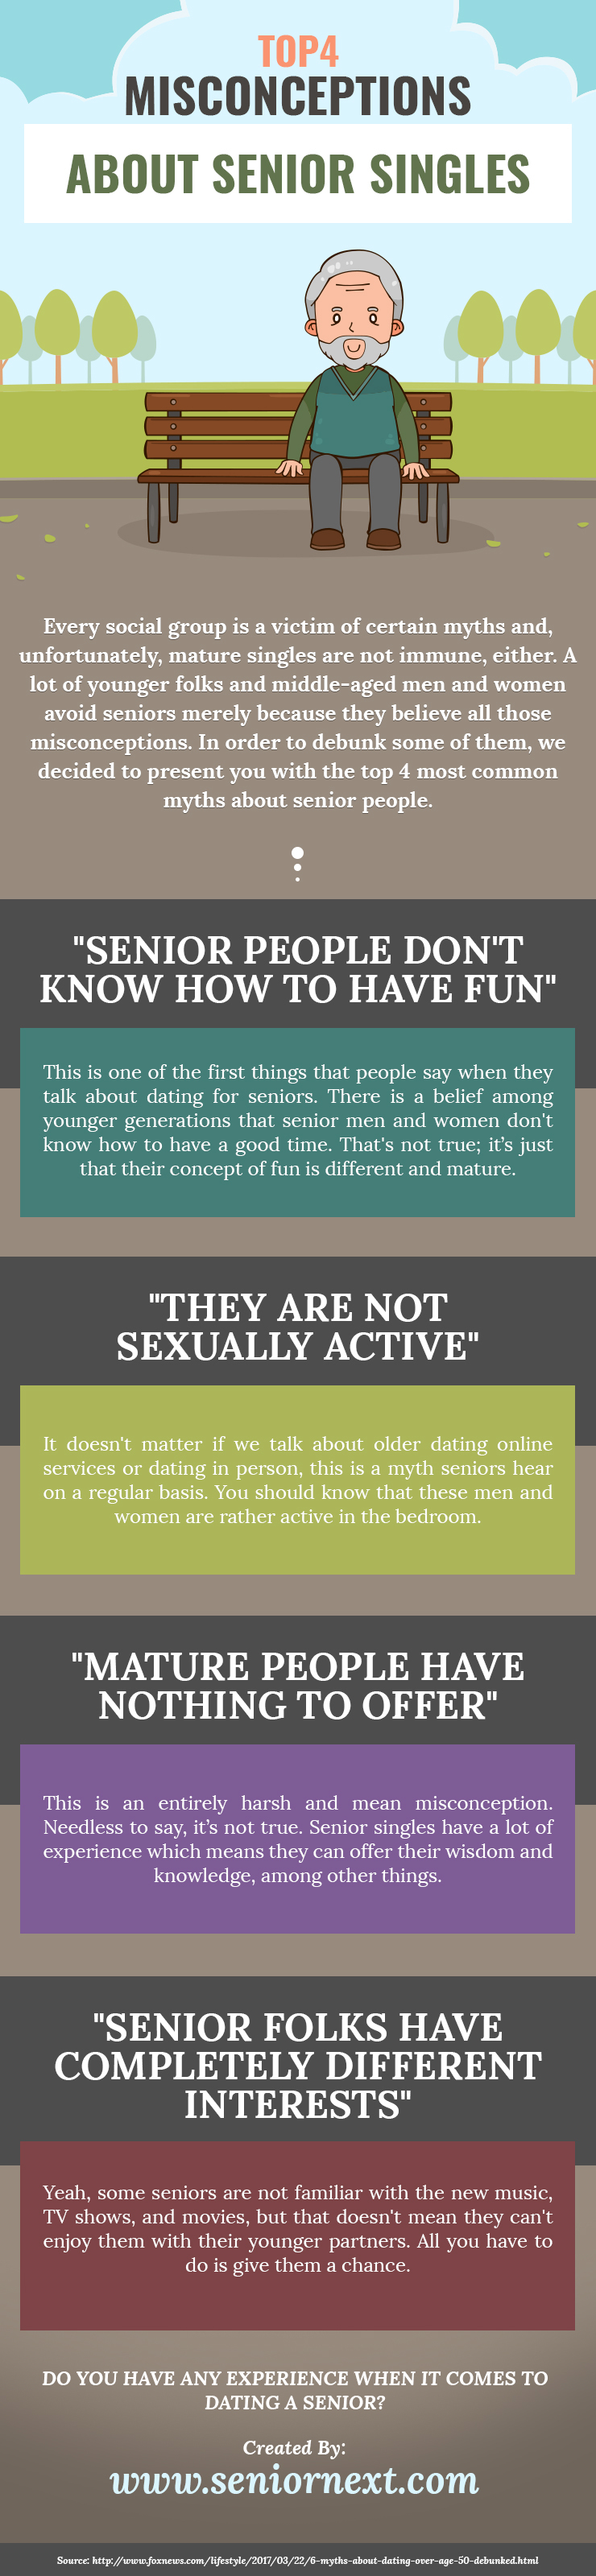 Top 4 Misconceptions About Senior Singles